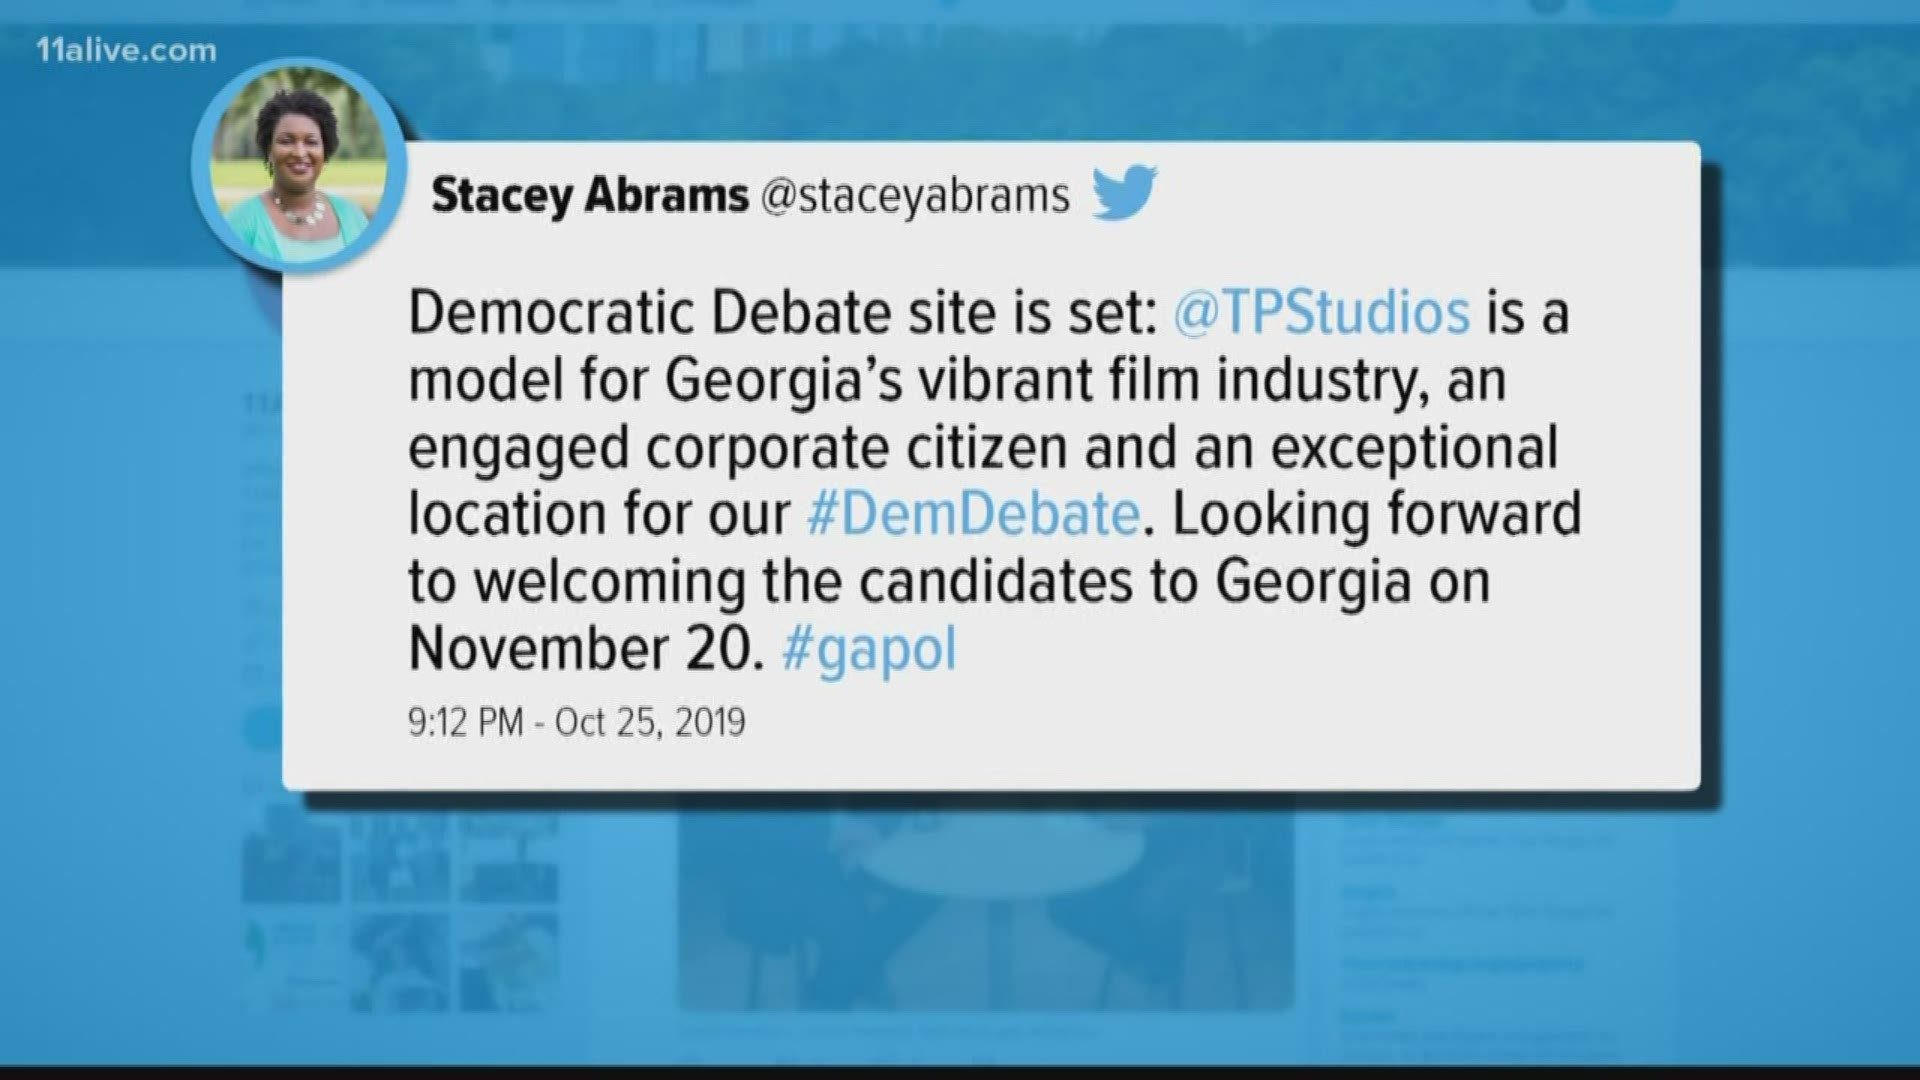 Stacey Abrams tweeted the location Friday night.